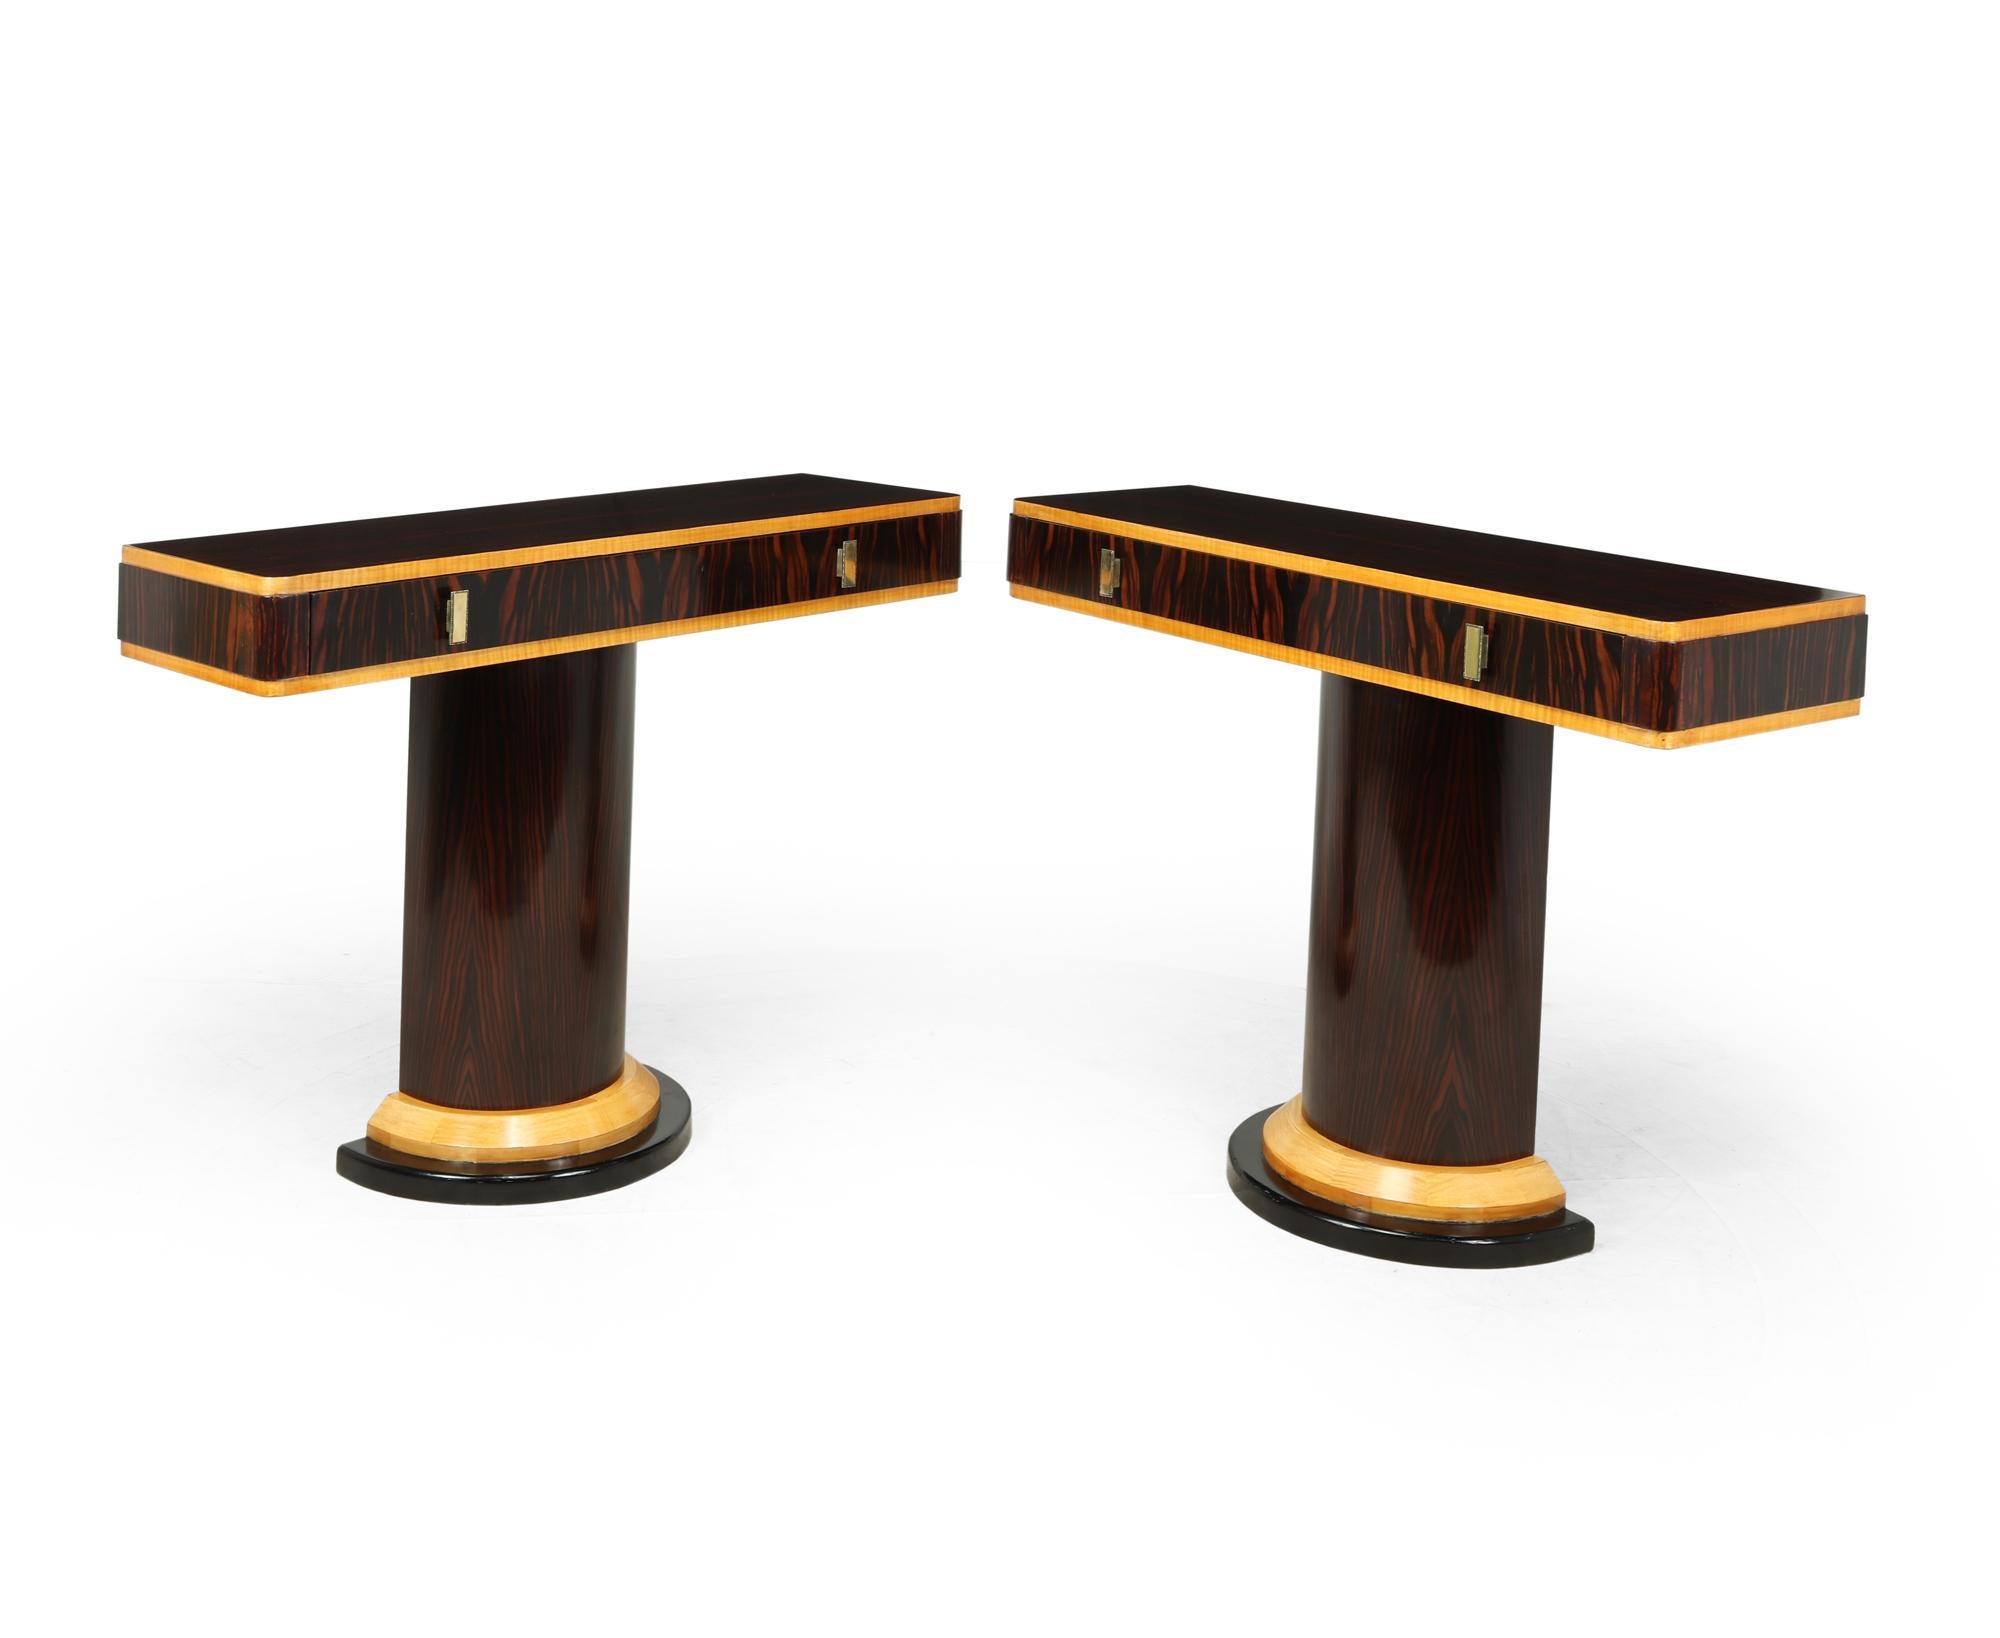 A pair of entrance hall console tables produced in France in the 1920’s, oak and mahogany with luxurious Macassar ebony veneers with sycamore banding. The top has a single long drawer and stands on a demi-lune column with heavier stepped plinth.